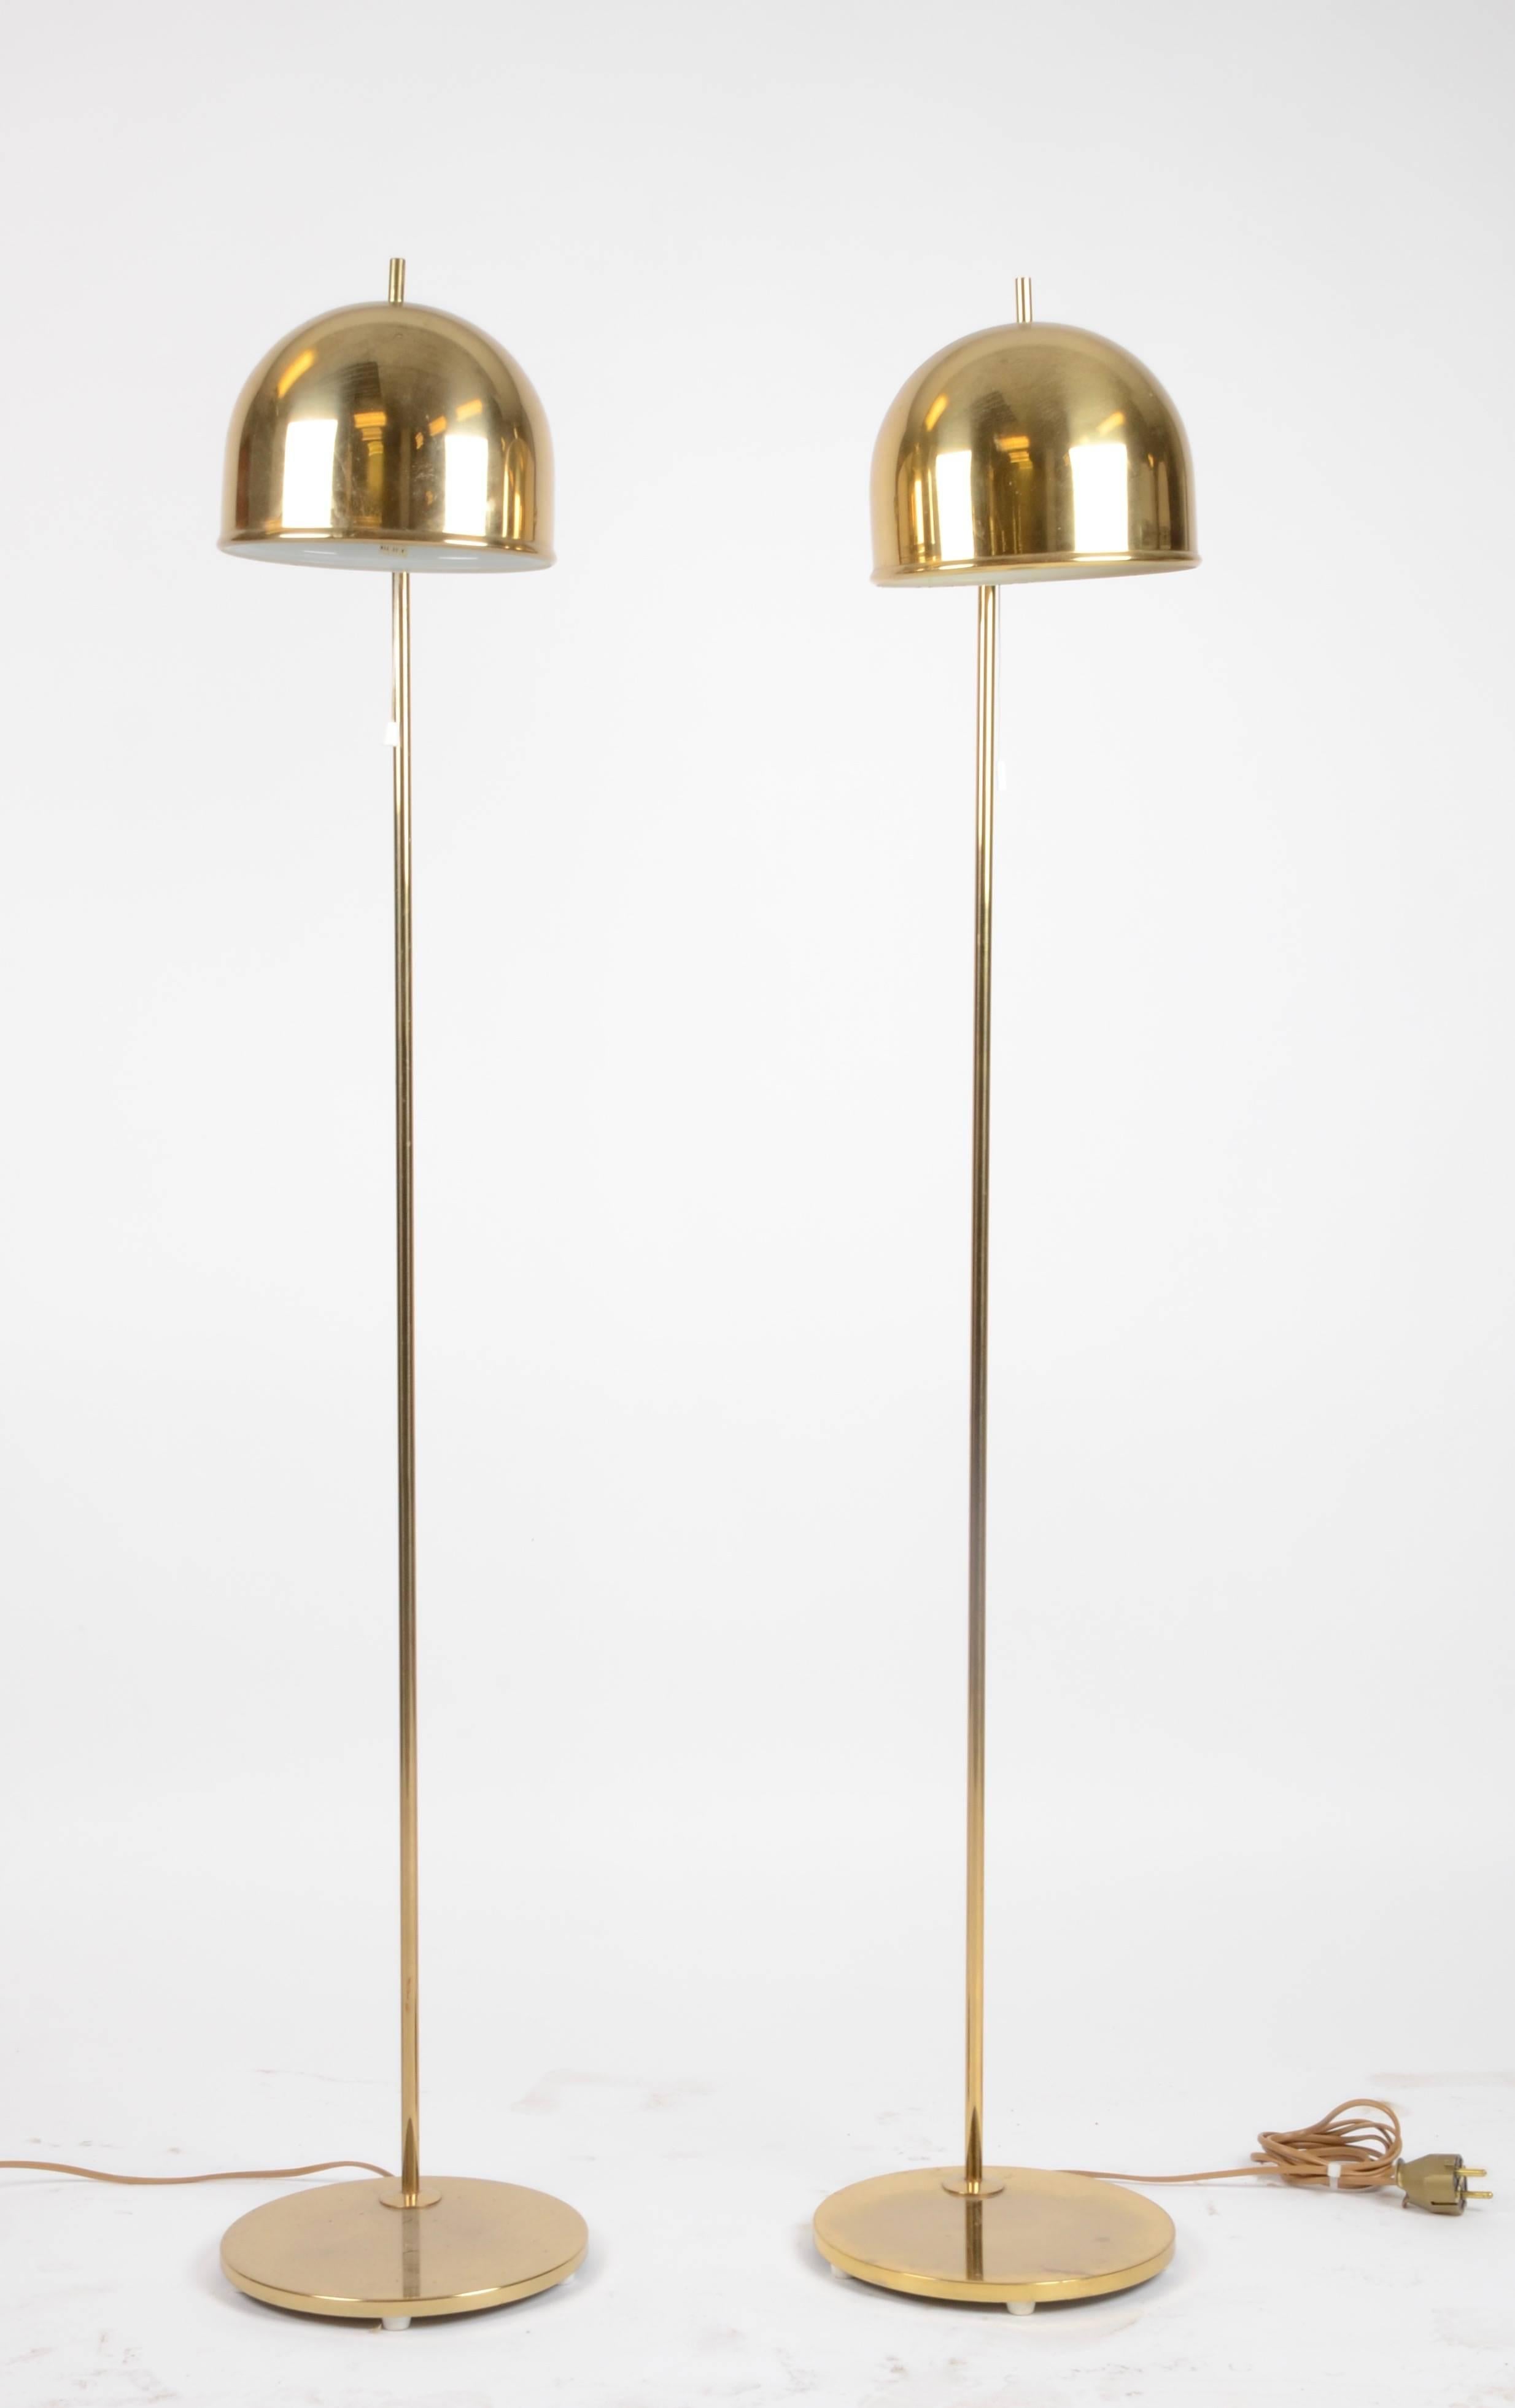 Set of two floor lamps in brass, model G-075 manufactured by Bergboms, Sweden, 1960-1970s.